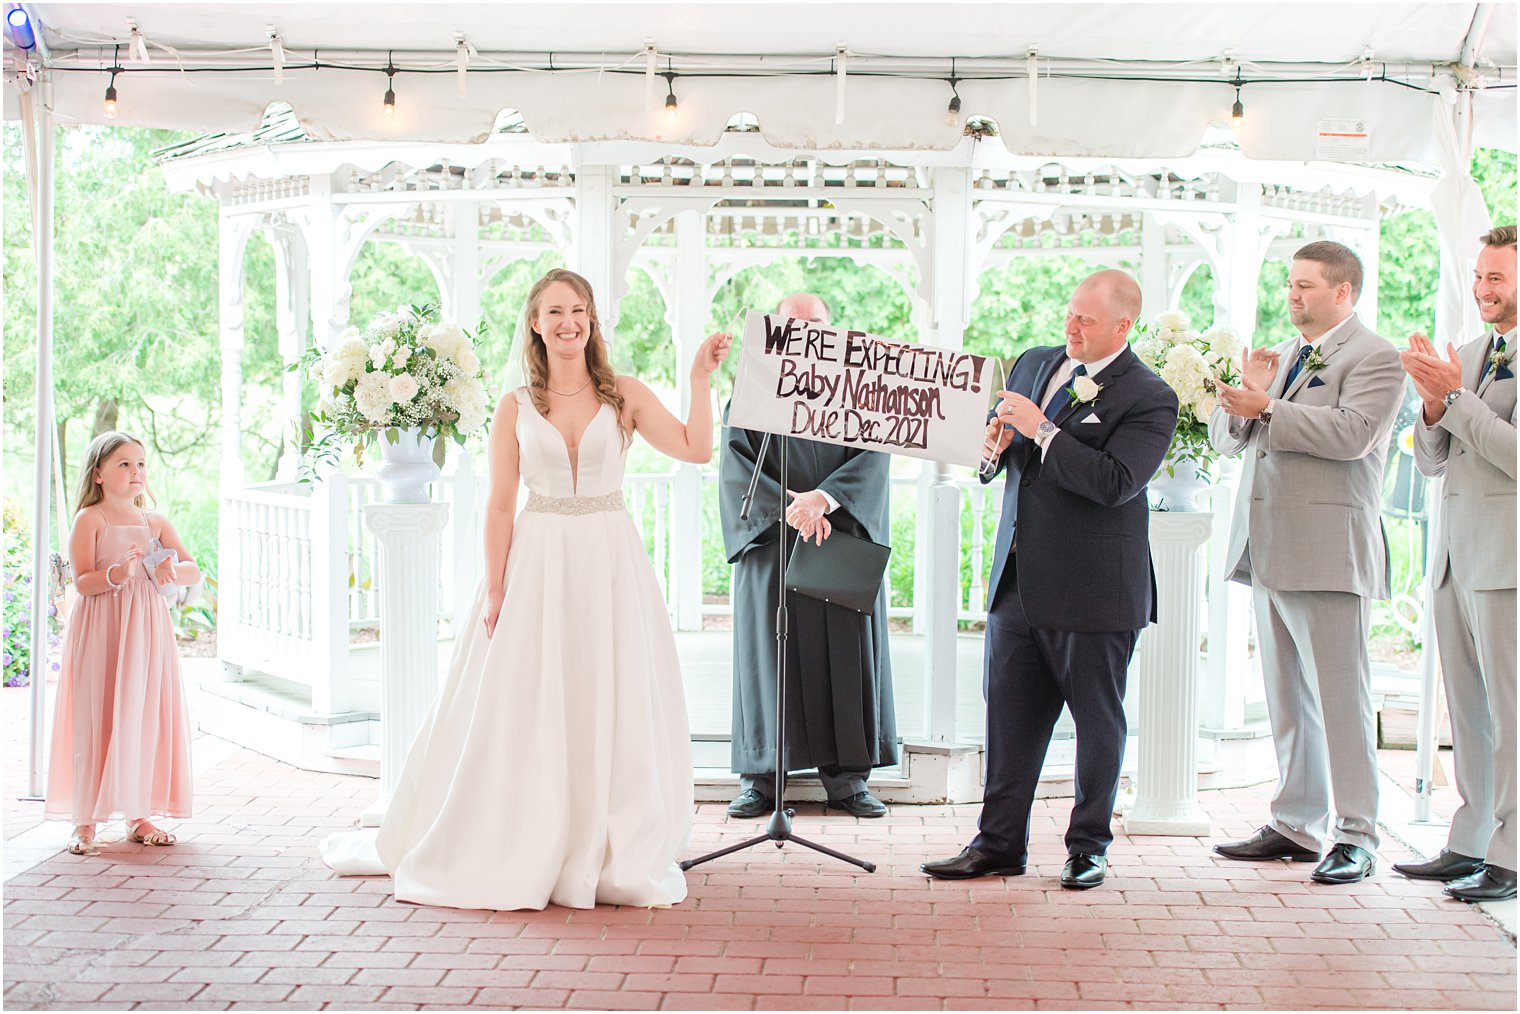 baby announcement at the end of wedding ceremony at Forsgate Country Club